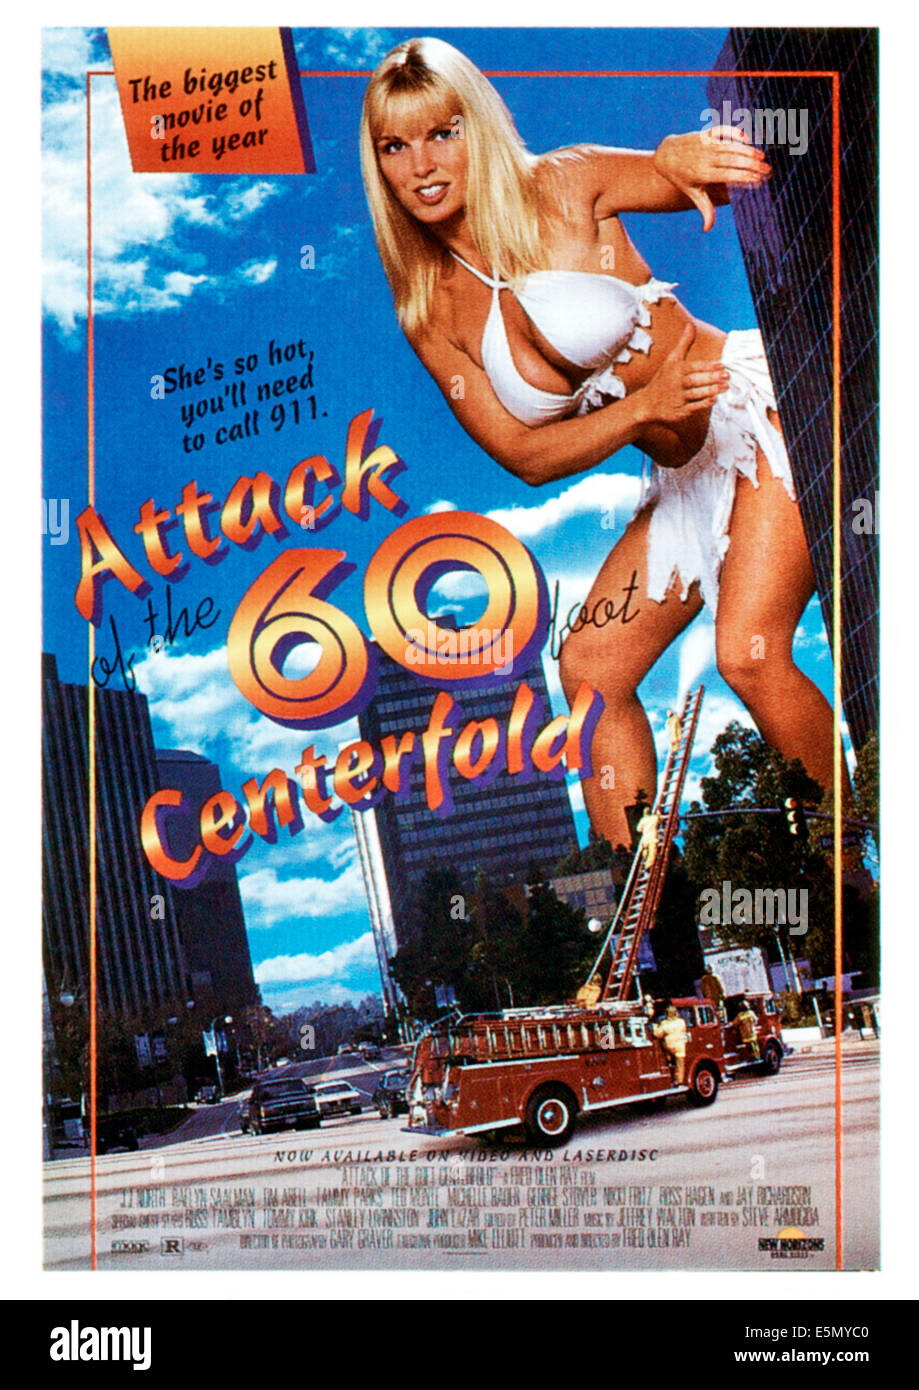 ATTACK OF THE 60 FOOT CENTERFOLD, J.J. North on poster art, 1995, ©American Independent Productions/courtesy Everett Collection Stock Photo